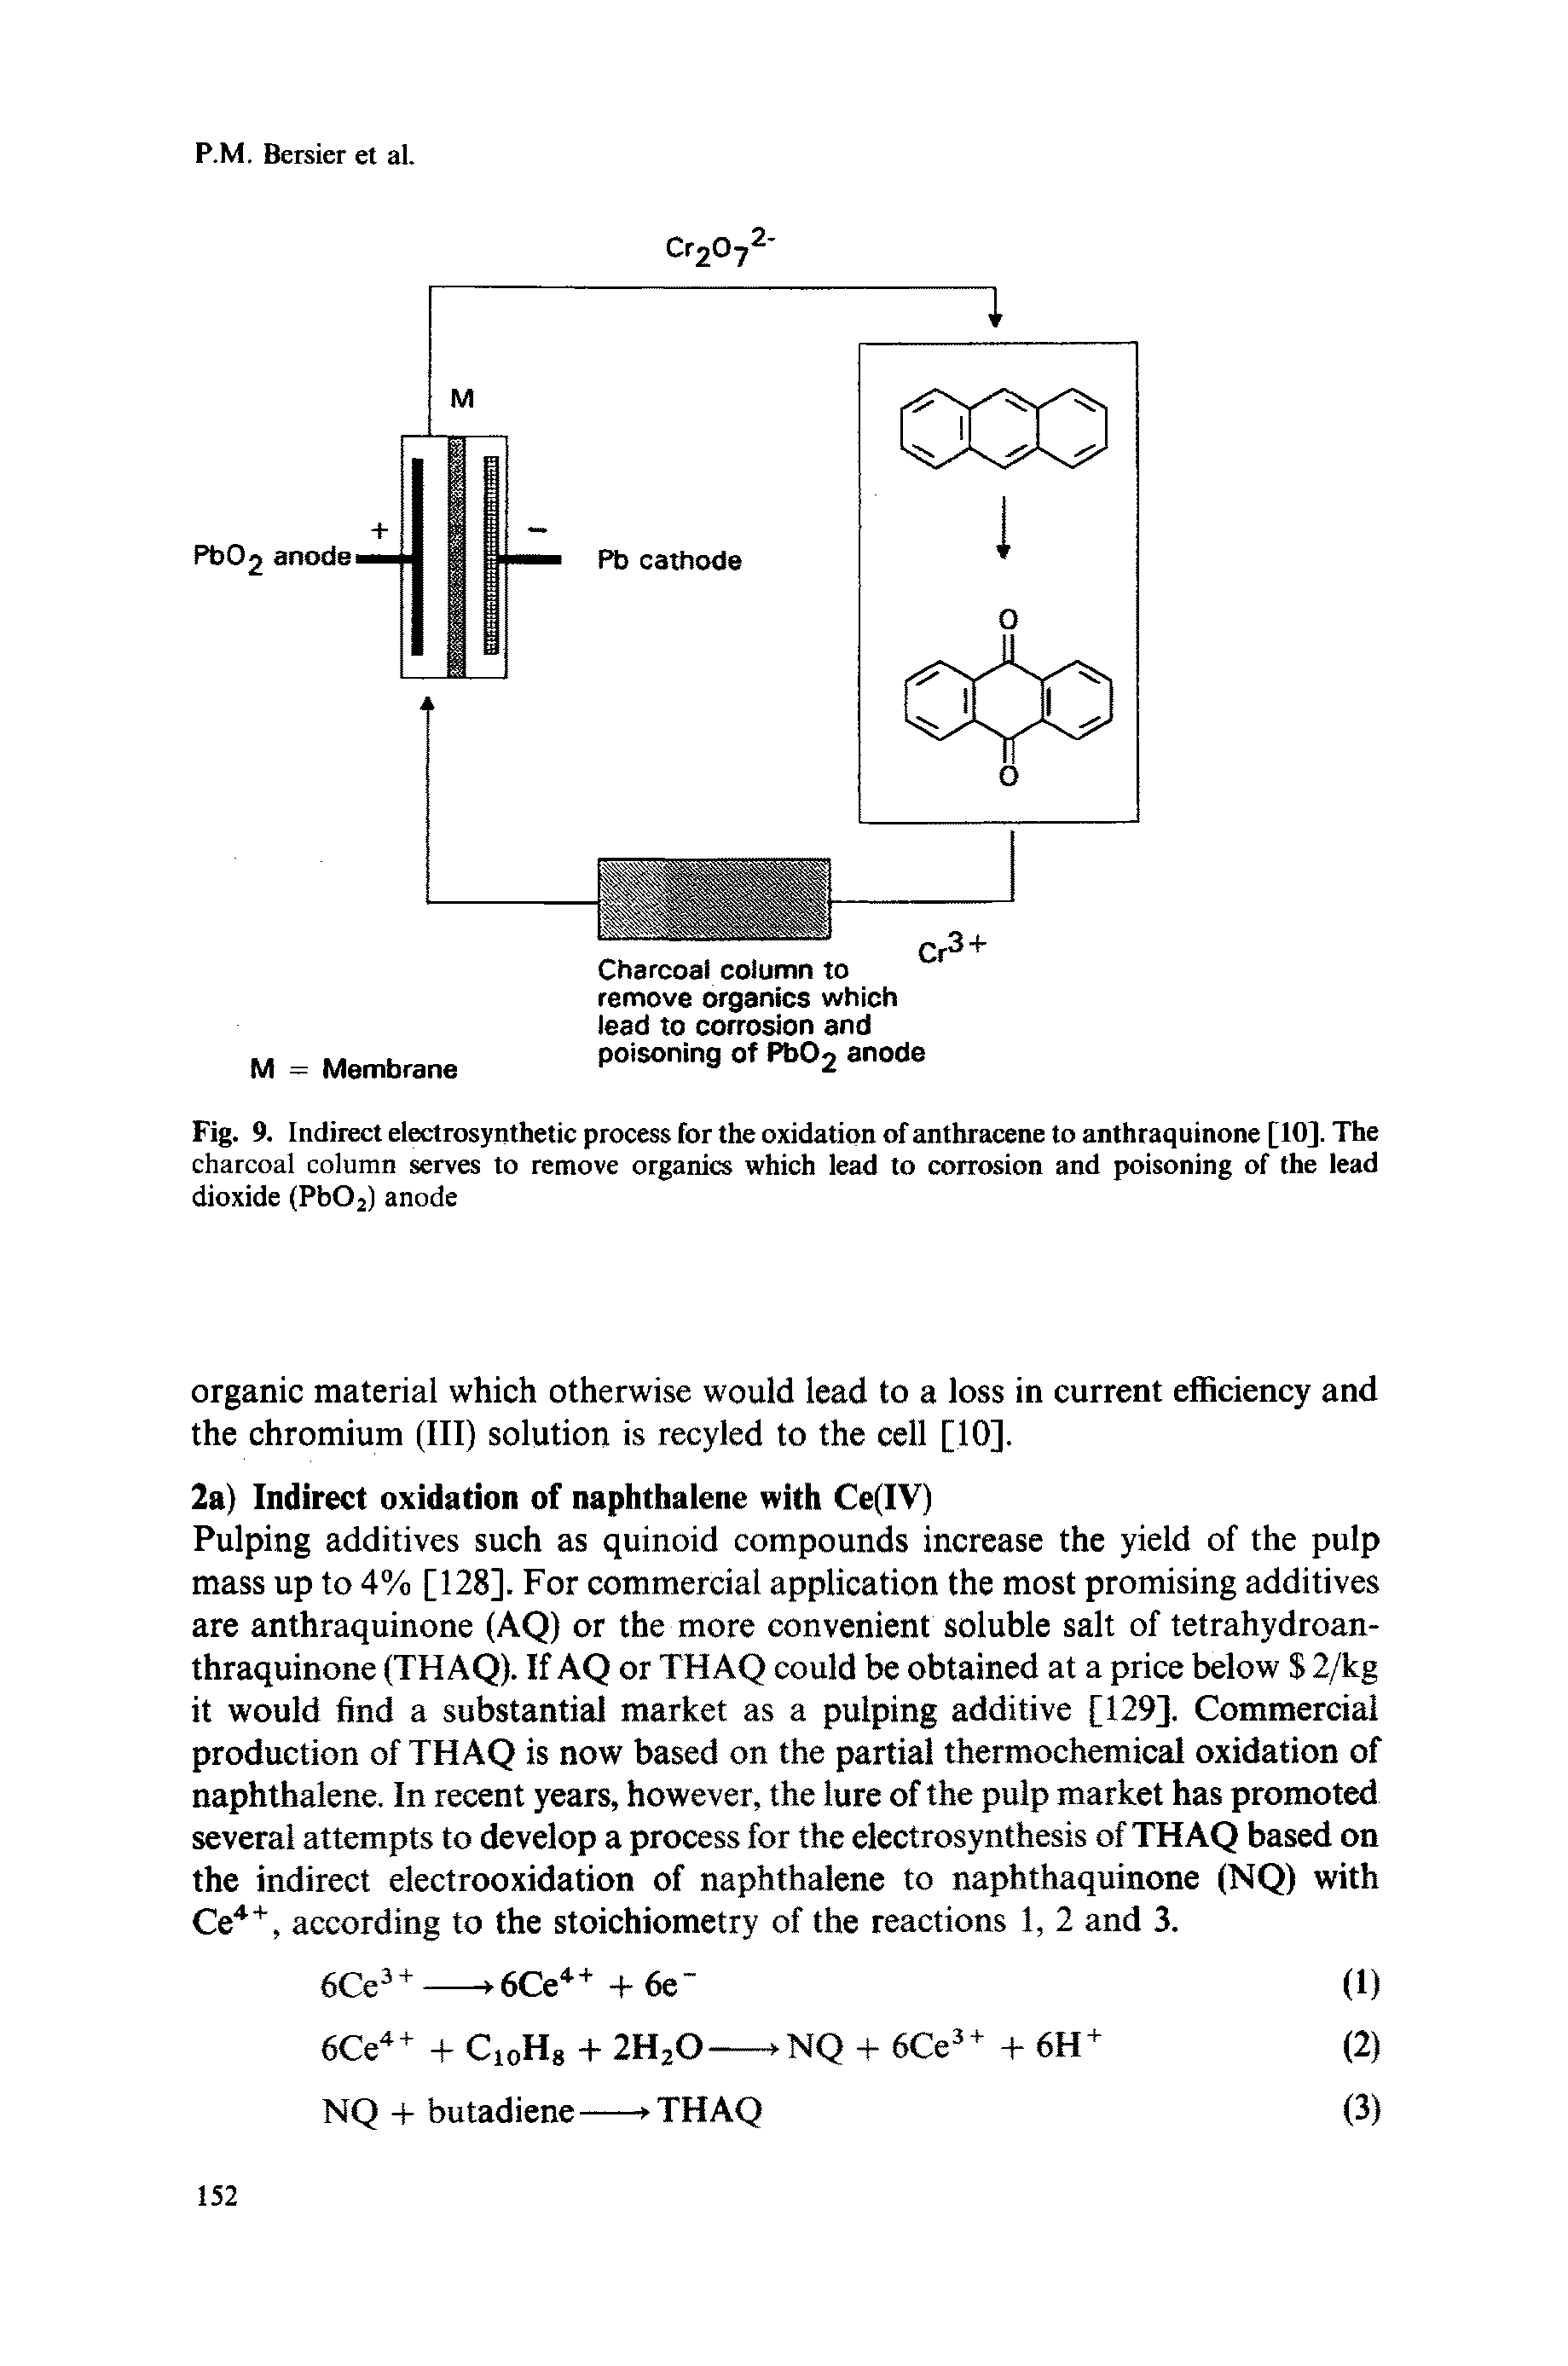 Fig. 9. Indirect electrosynthetic process for the oxidation of anthracene to anthraquinone [10]. The charcoal column serves to remove organics which lead to corrosion and poisoning of the lead dioxide (PbO ) anode...